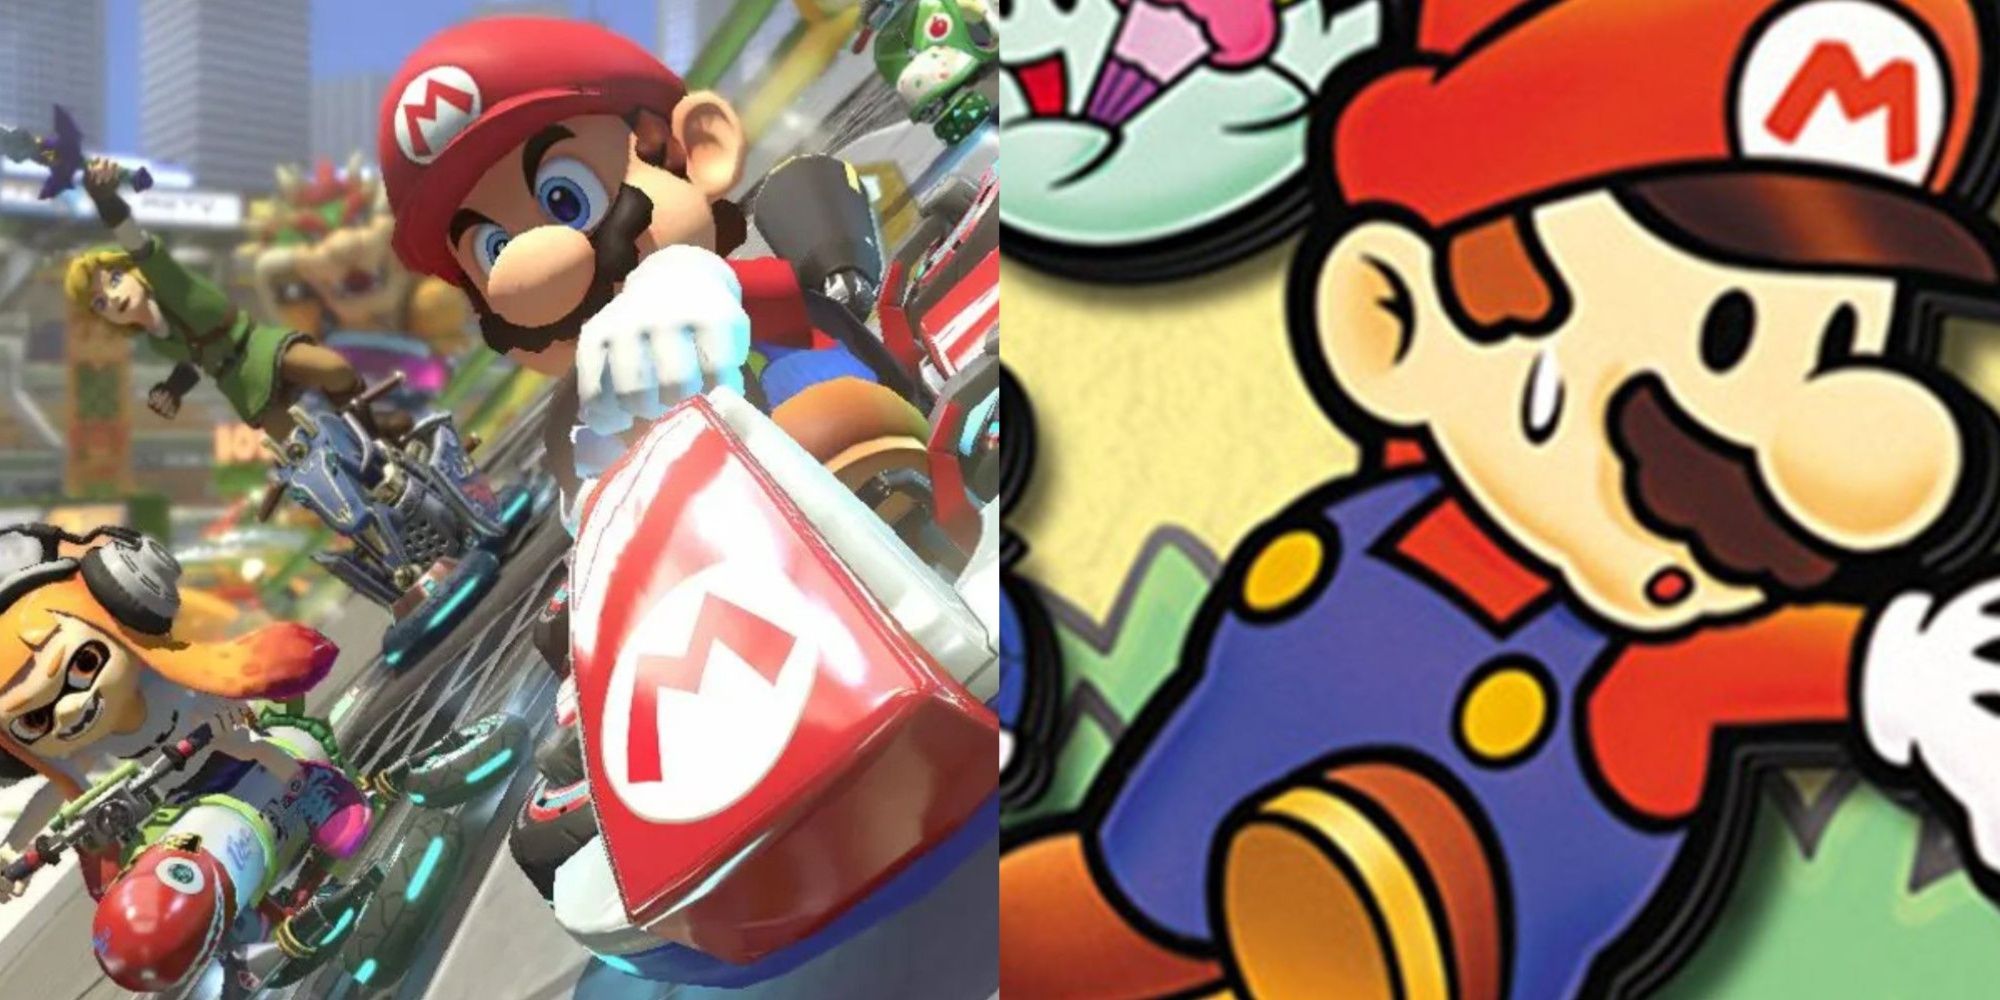 Mario, Link and friends racing in Mario Kart 8, and the box art to Paper Mario